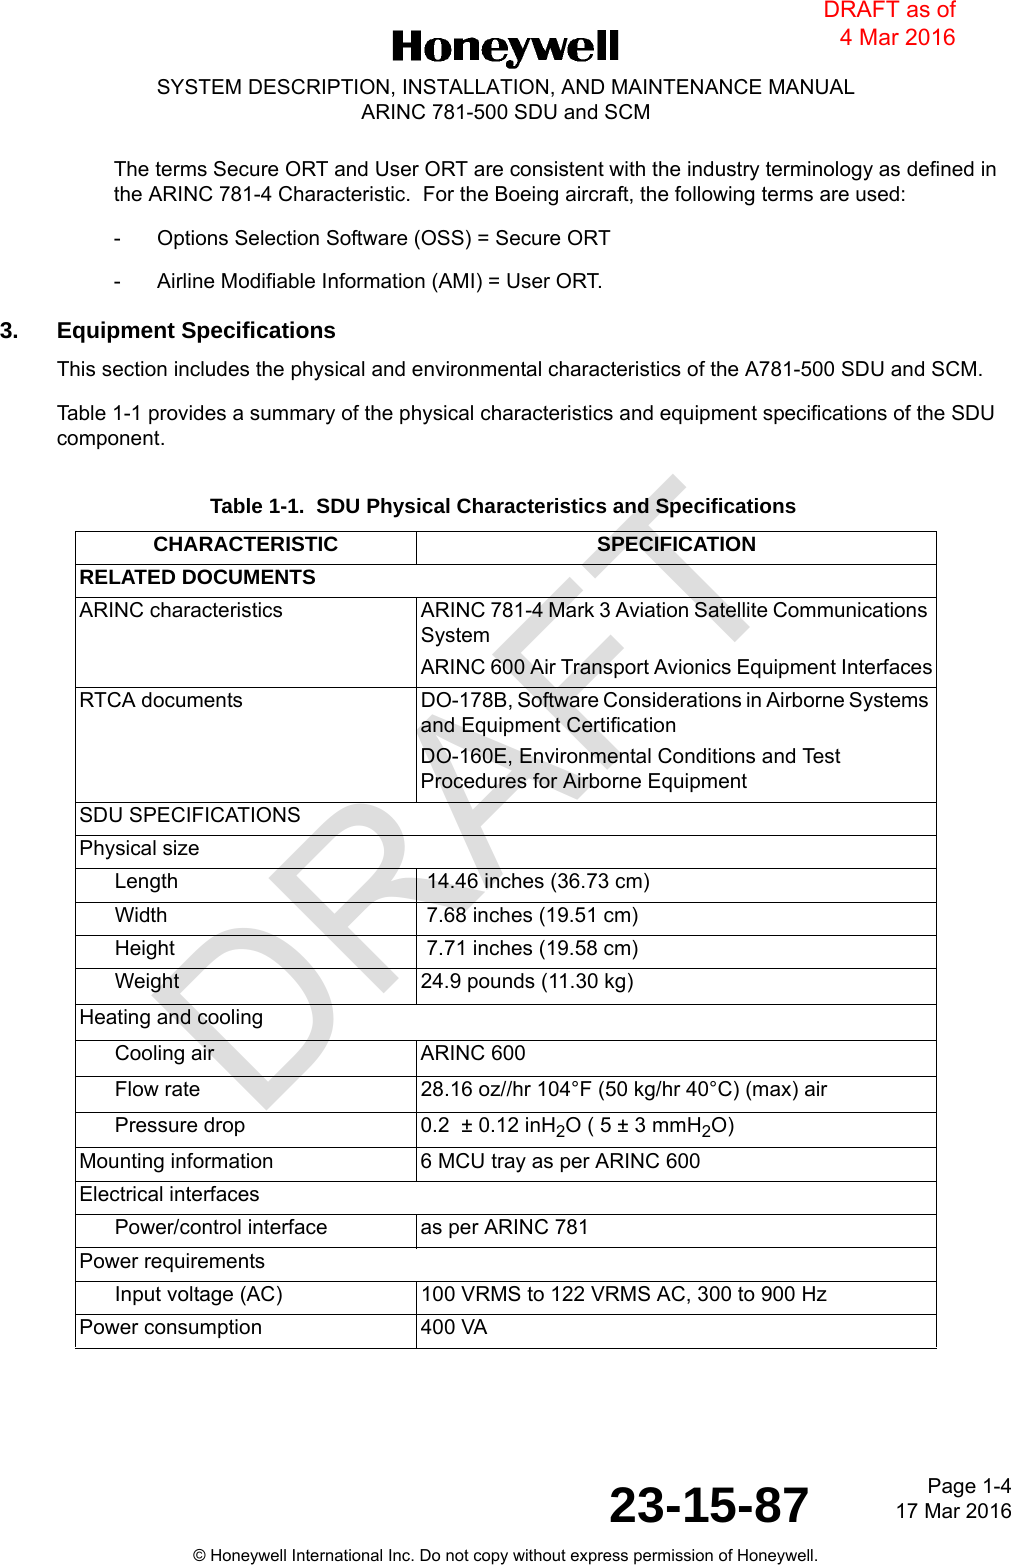 DRAFTPage 1-417 Mar 201623-15-87© Honeywell International Inc. Do not copy without express permission of Honeywell.SYSTEM DESCRIPTION, INSTALLATION, AND MAINTENANCE MANUALARINC 781-500 SDU and SCMThe terms Secure ORT and User ORT are consistent with the industry terminology as defined in the ARINC 781-4 Characteristic.  For the Boeing aircraft, the following terms are used:- Options Selection Software (OSS) = Secure ORT- Airline Modifiable Information (AMI) = User ORT.3. Equipment SpecificationsThis section includes the physical and environmental characteristics of the A781-500 SDU and SCM.Table 1-1 provides a summary of the physical characteristics and equipment specifications of the SDU component.Table 1-1.  SDU Physical Characteristics and SpecificationsCHARACTERISTIC SPECIFICATIONRELATED DOCUMENTSARINC characteristics ARINC 781-4 Mark 3 Aviation Satellite Communications SystemARINC 600 Air Transport Avionics Equipment InterfacesRTCA documents DO-178B, Software Considerations in Airborne Systems and Equipment CertificationDO-160E, Environmental Conditions and Test Procedures for Airborne EquipmentSDU SPECIFICATIONSPhysical sizeLength  14.46 inches (36.73 cm)Width  7.68 inches (19.51 cm)Height  7.71 inches (19.58 cm)Weight 24.9 pounds (11.30 kg)Heating and coolingCooling air ARINC 600Flow rate 28.16 oz//hr 104°F (50 kg/hr 40°C) (max) air Pressure drop 0.2  ± 0.12 inH2O ( 5 ± 3 mmH2O)Mounting information 6 MCU tray as per ARINC 600Electrical interfacesPower/control interface as per ARINC 781Power requirementsInput voltage (AC) 100 VRMS to 122 VRMS AC, 300 to 900 HzPower consumption 400 VA DRAFT as of 4 Mar 2016